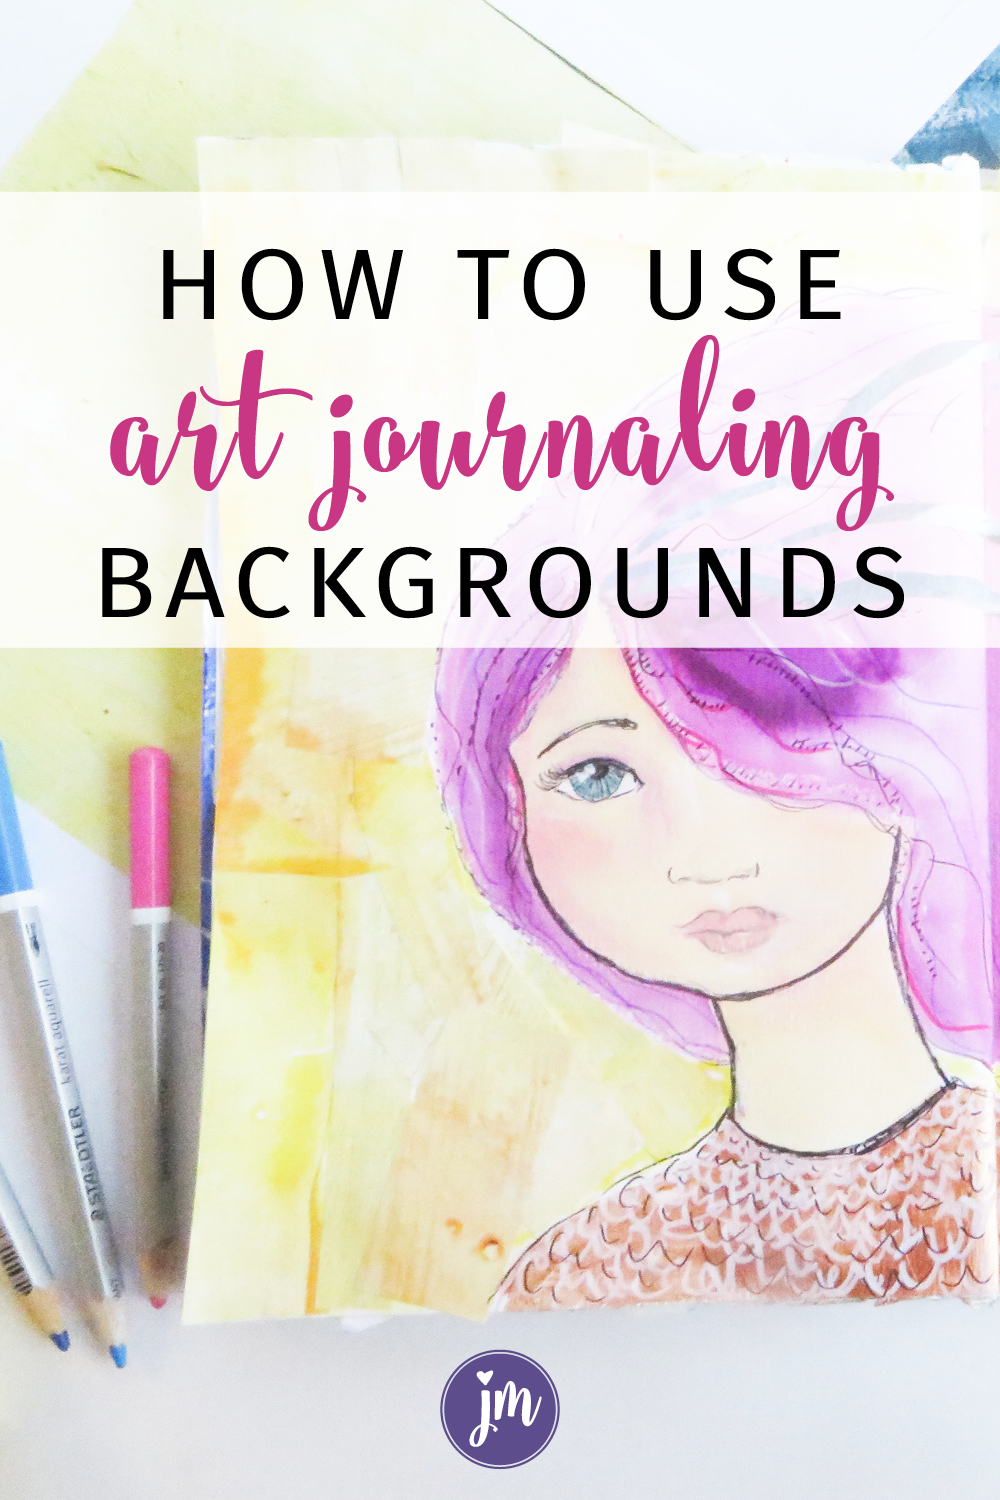 Have you ever used printable art journaling backgrounds in your journals? They are so much fun to use and super easy too! I love how they add such a variety of textures and color to my work that I wouldn't normally use. It's kind of like a colorful art journal prompt! This post includes a free art journaling background printable too. Love it!